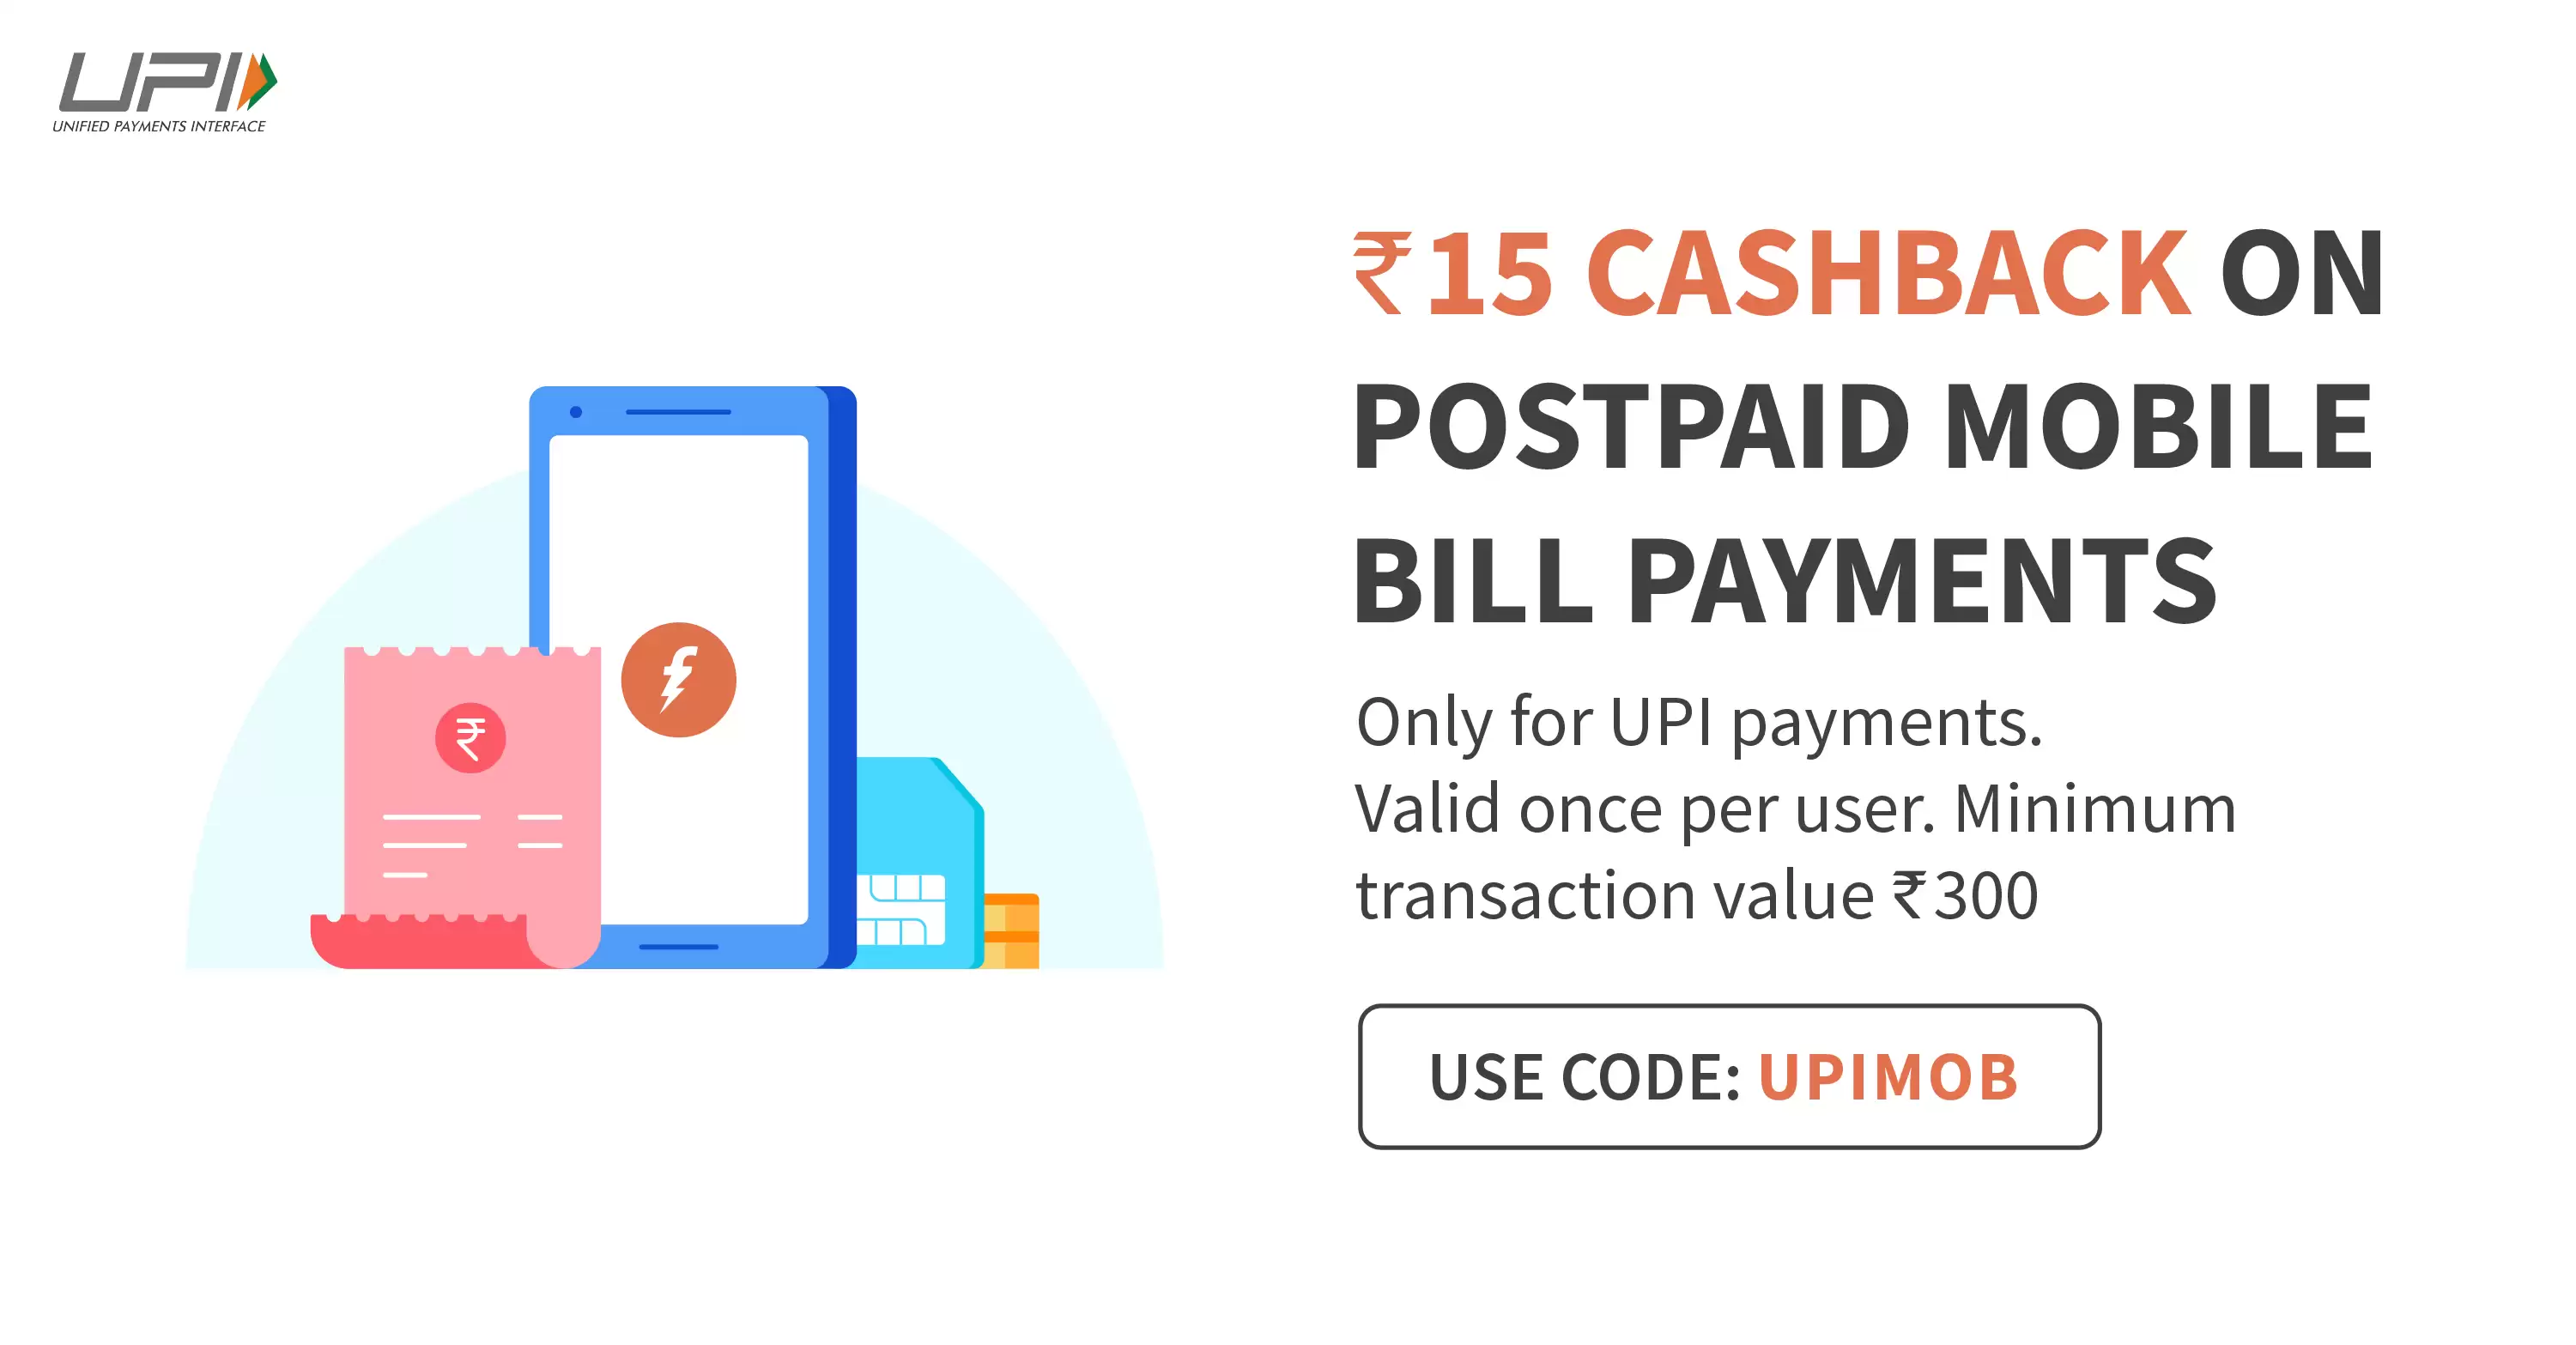 Flat Rs 15 Cb On Mobile Postpaid Bill Payments Of Rs 300 By Using Freecharge Upi